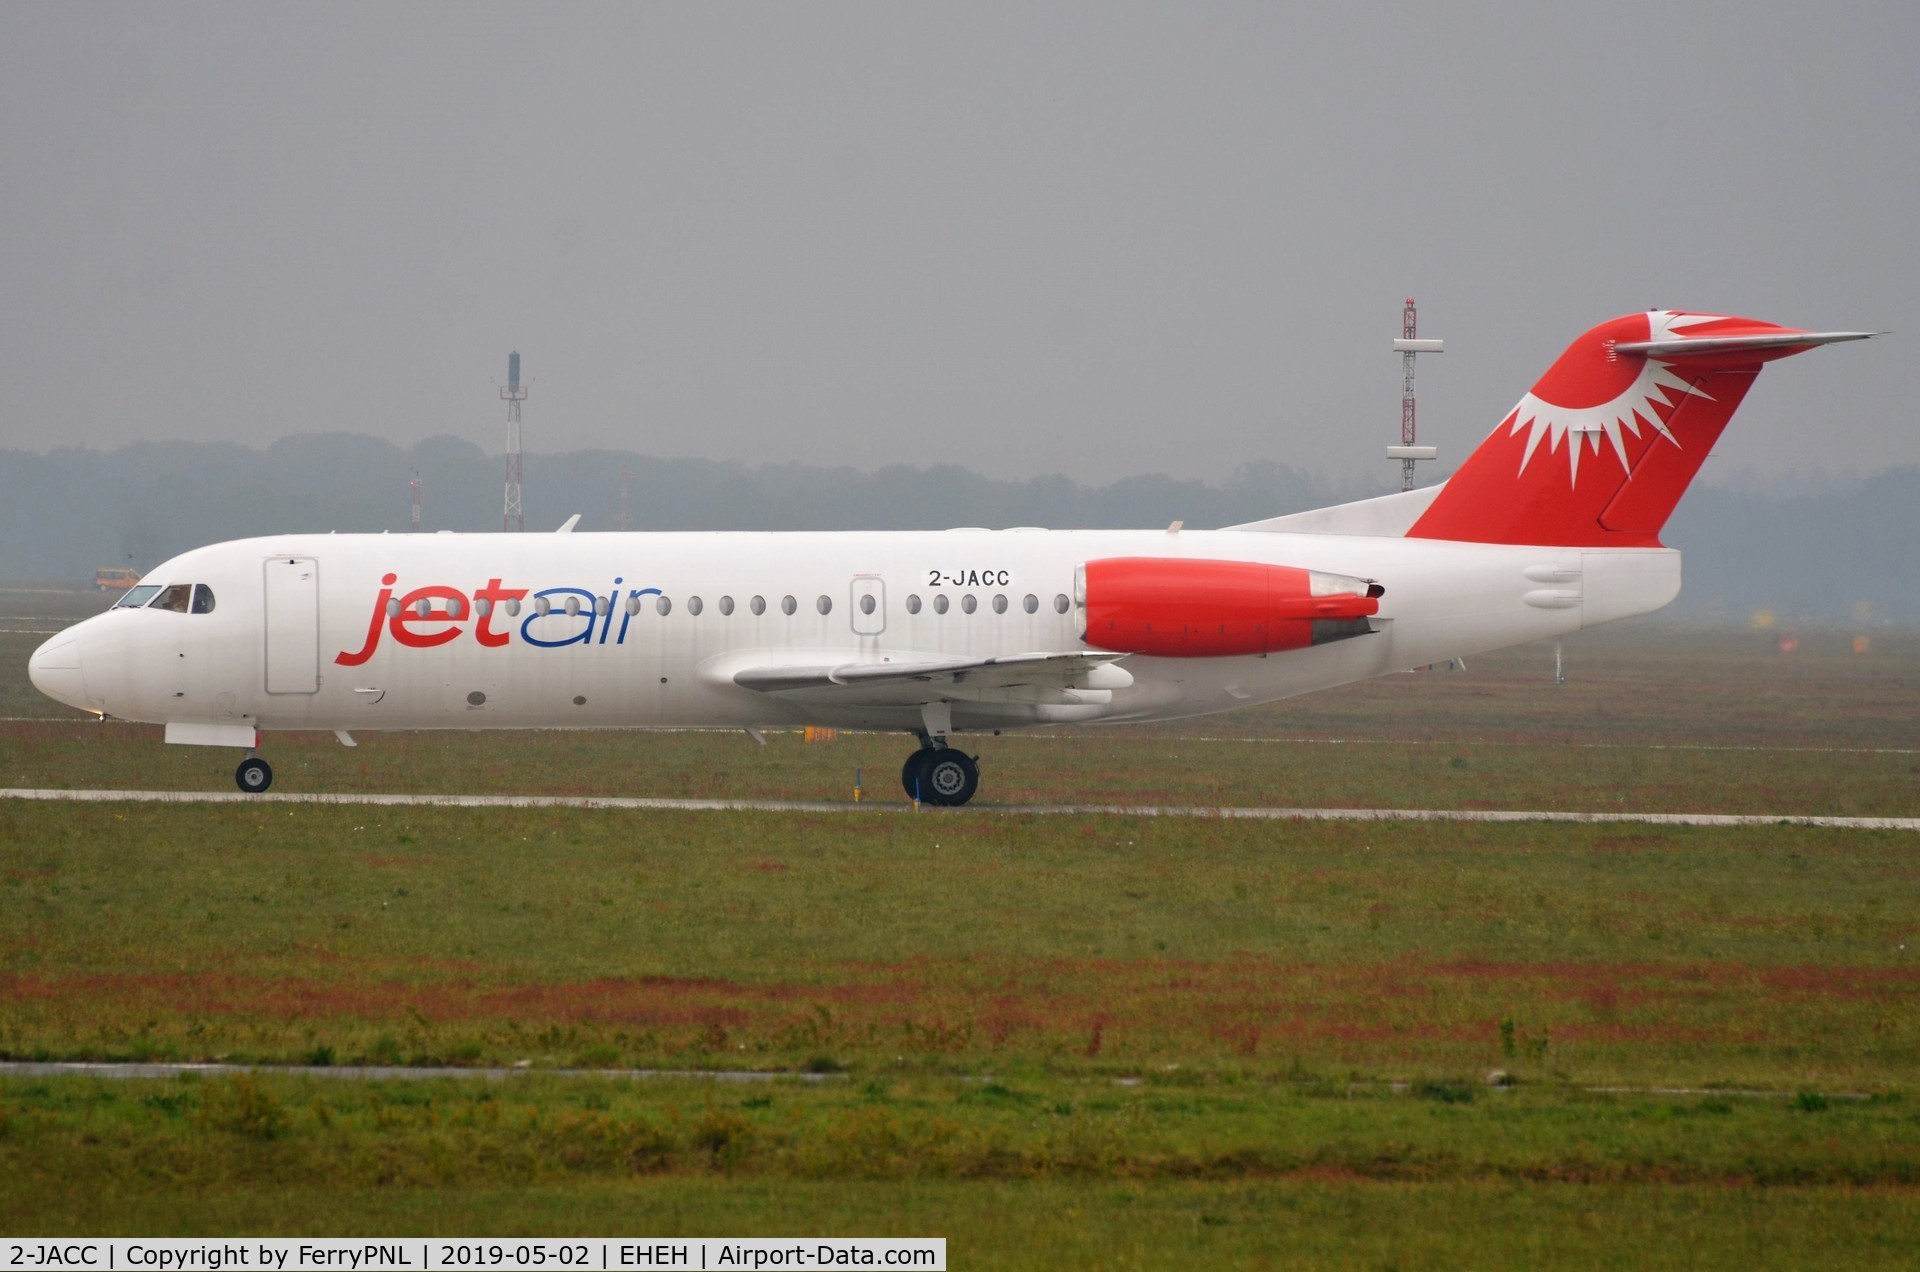 2-JACC, 1996 Fokker 70 (F-28-0070) C/N 11585, JetAir Caribbean Fk70 arrived in EIN after delivery flight from Asia.